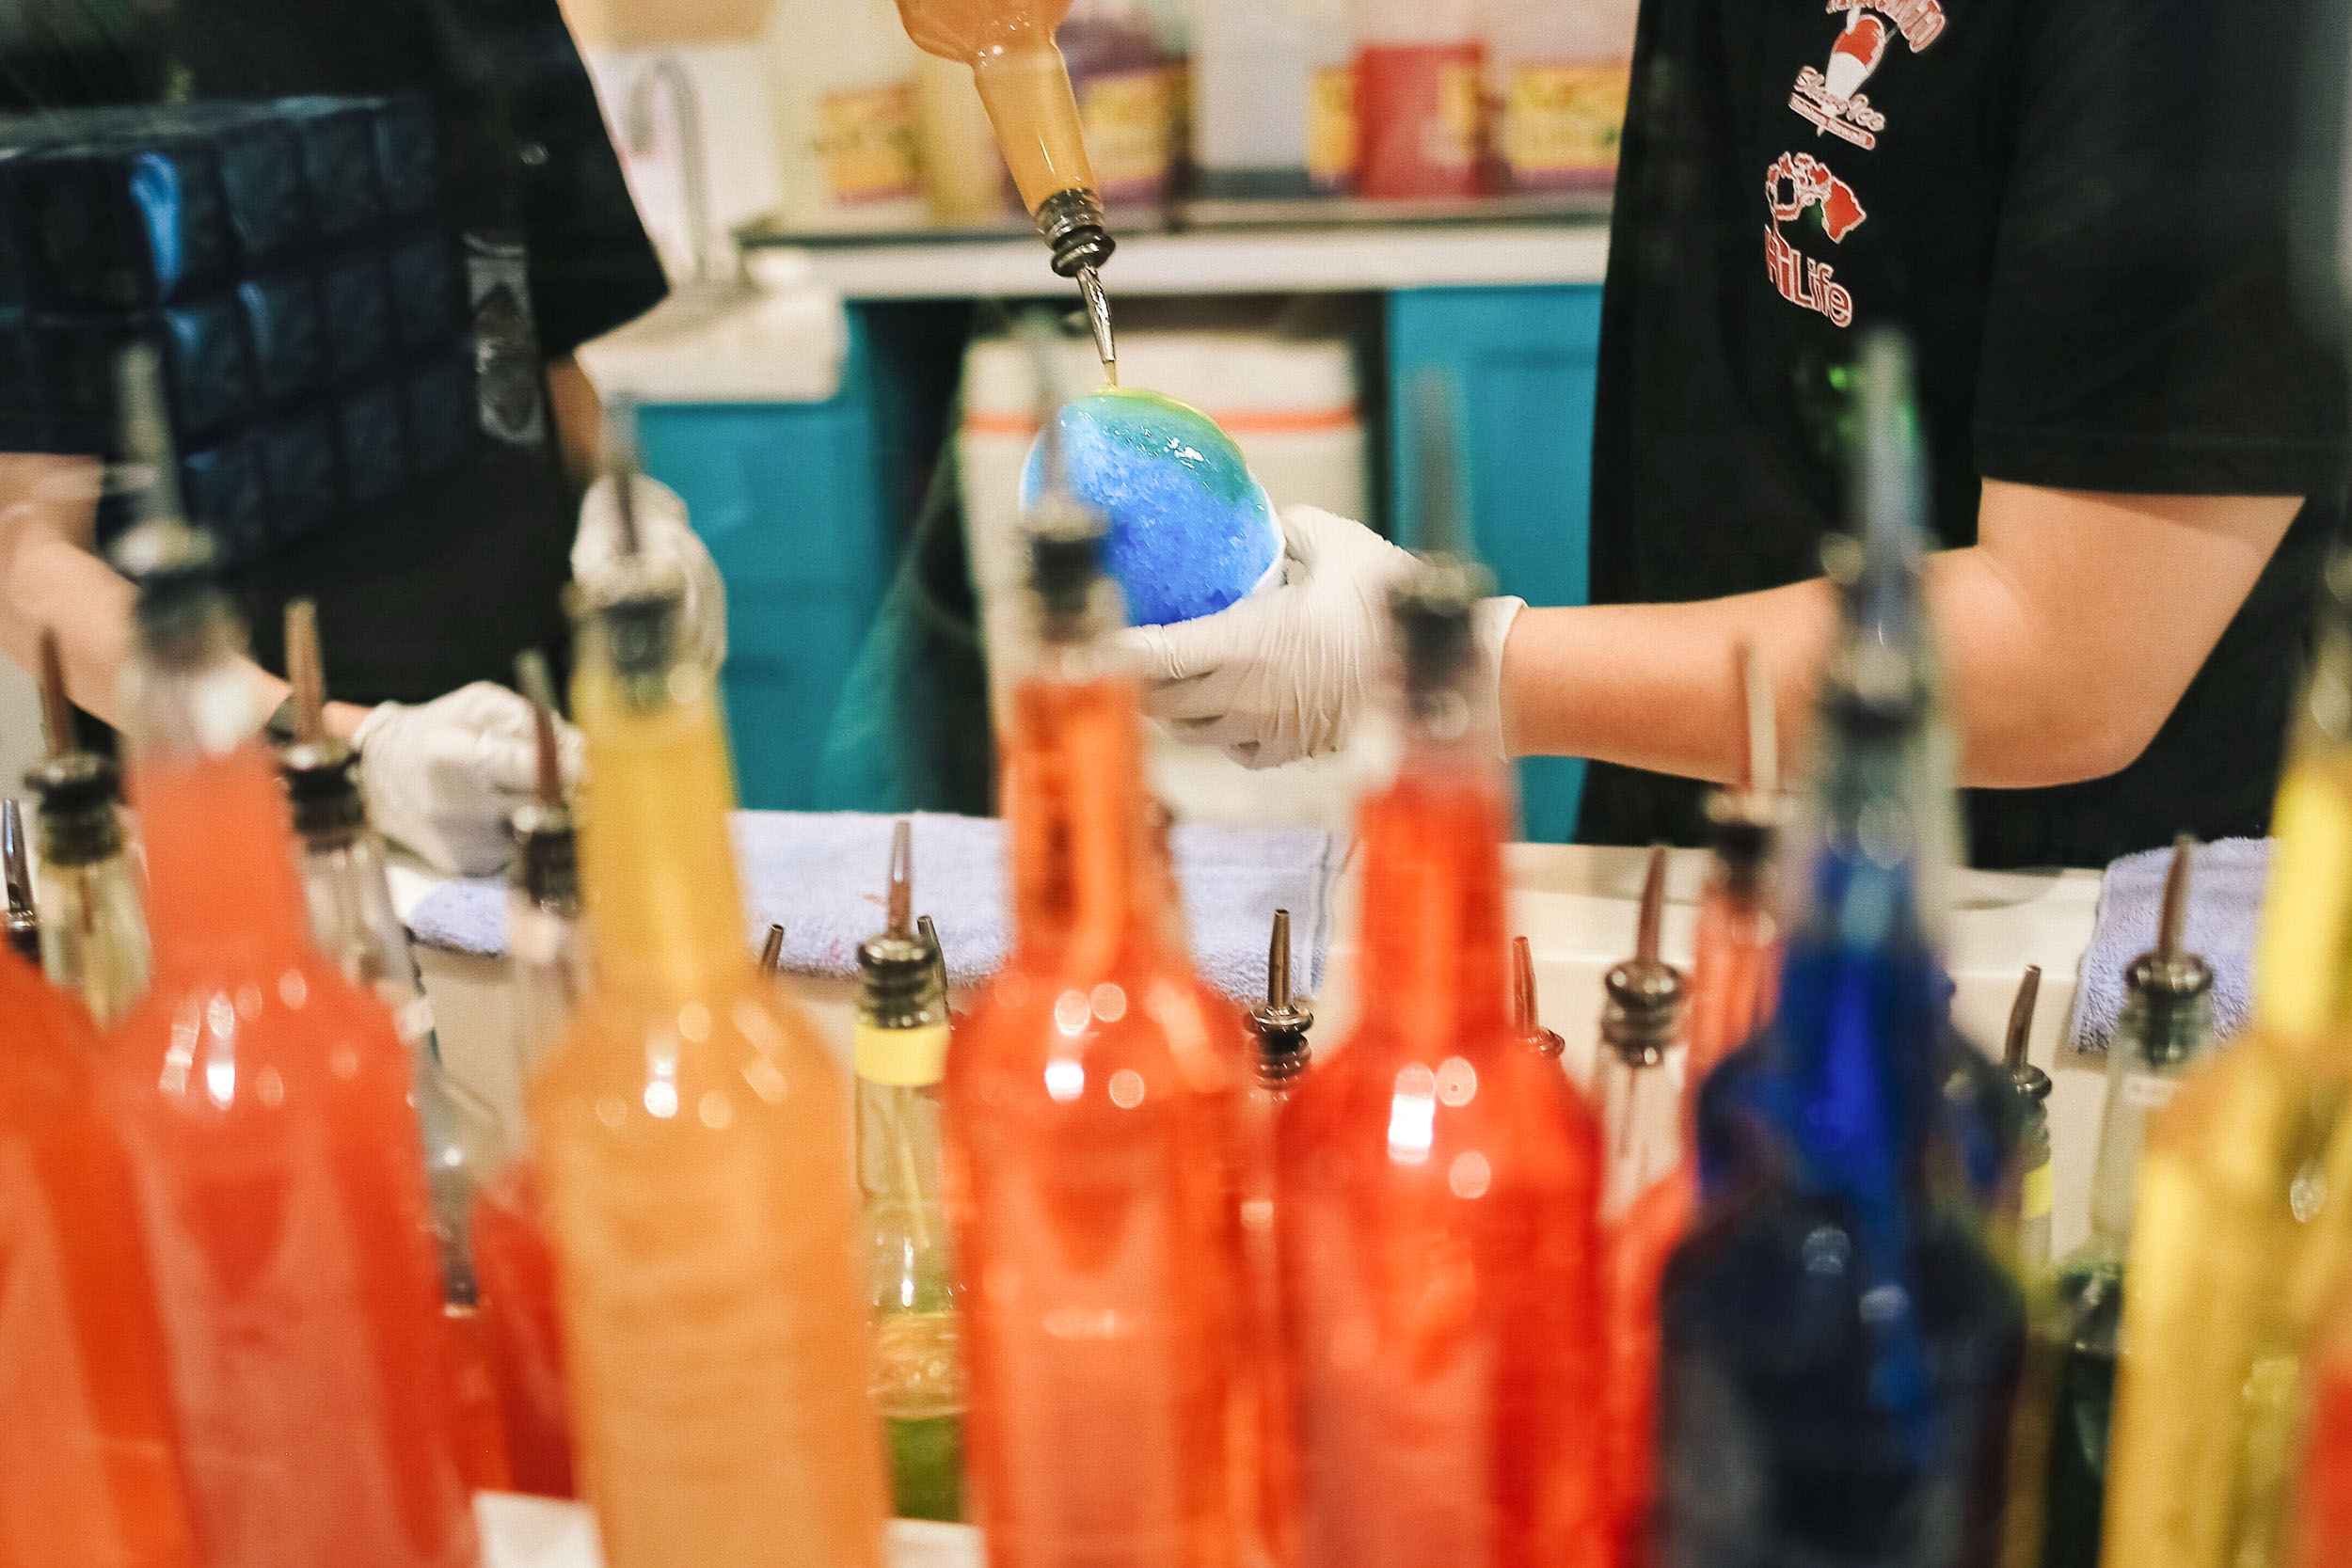 Flavored shave ice syrups